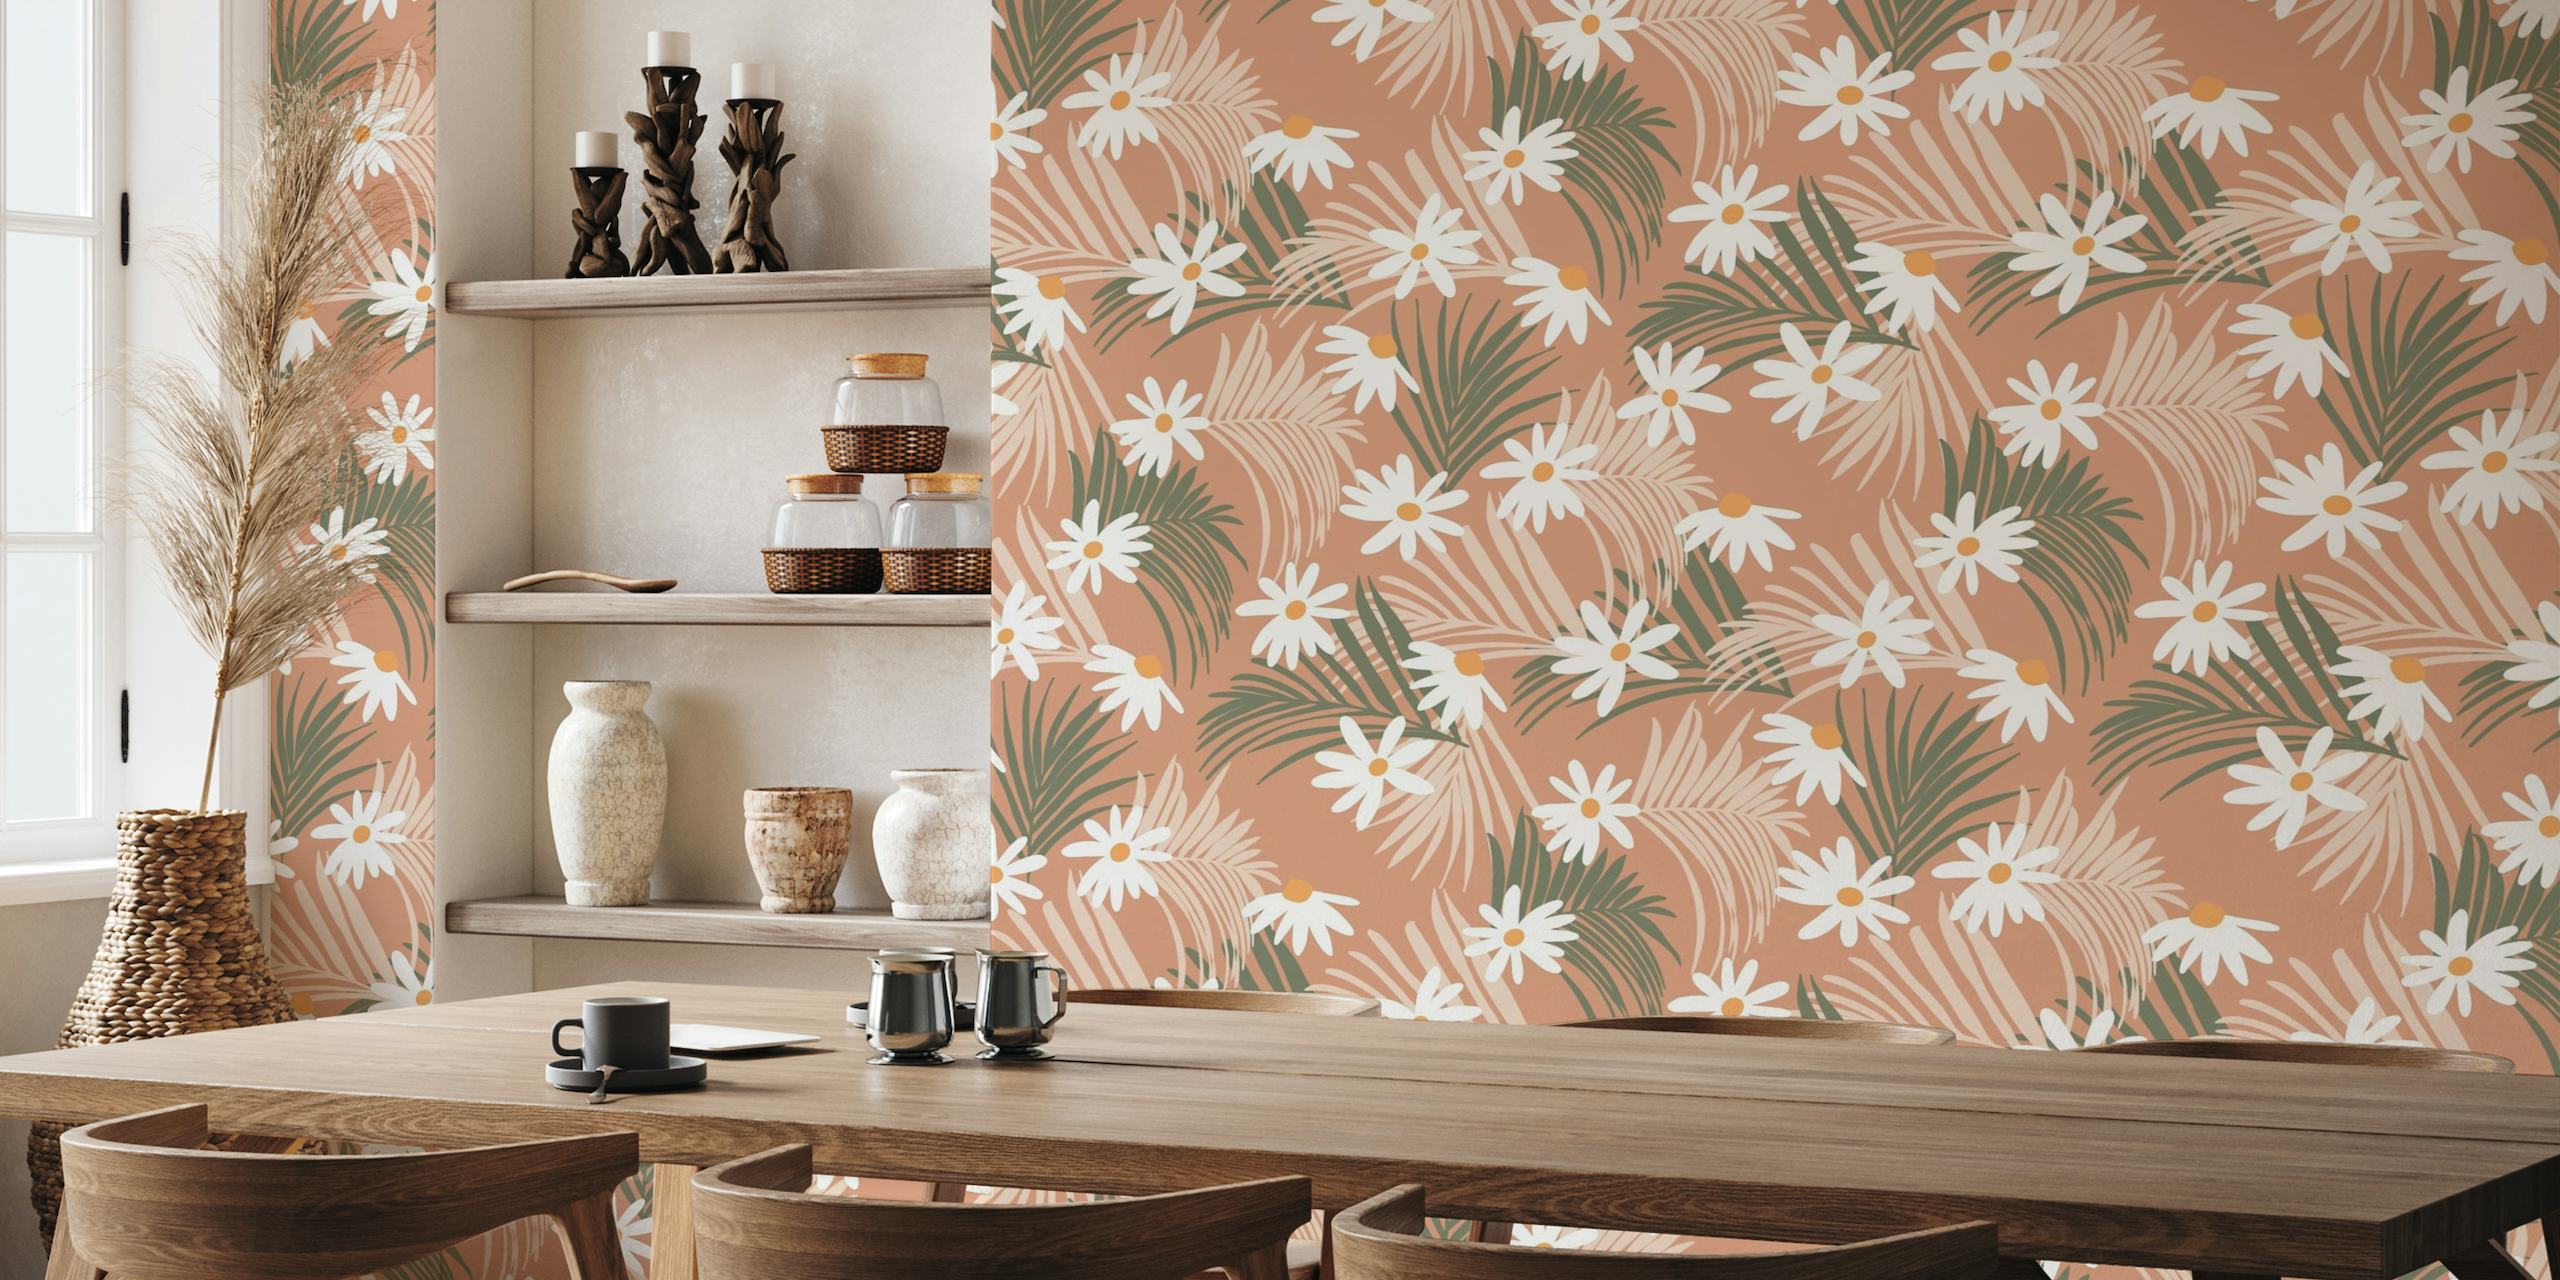 Retro-style daisy flowers and palm fronds wall mural on a terracotta background.